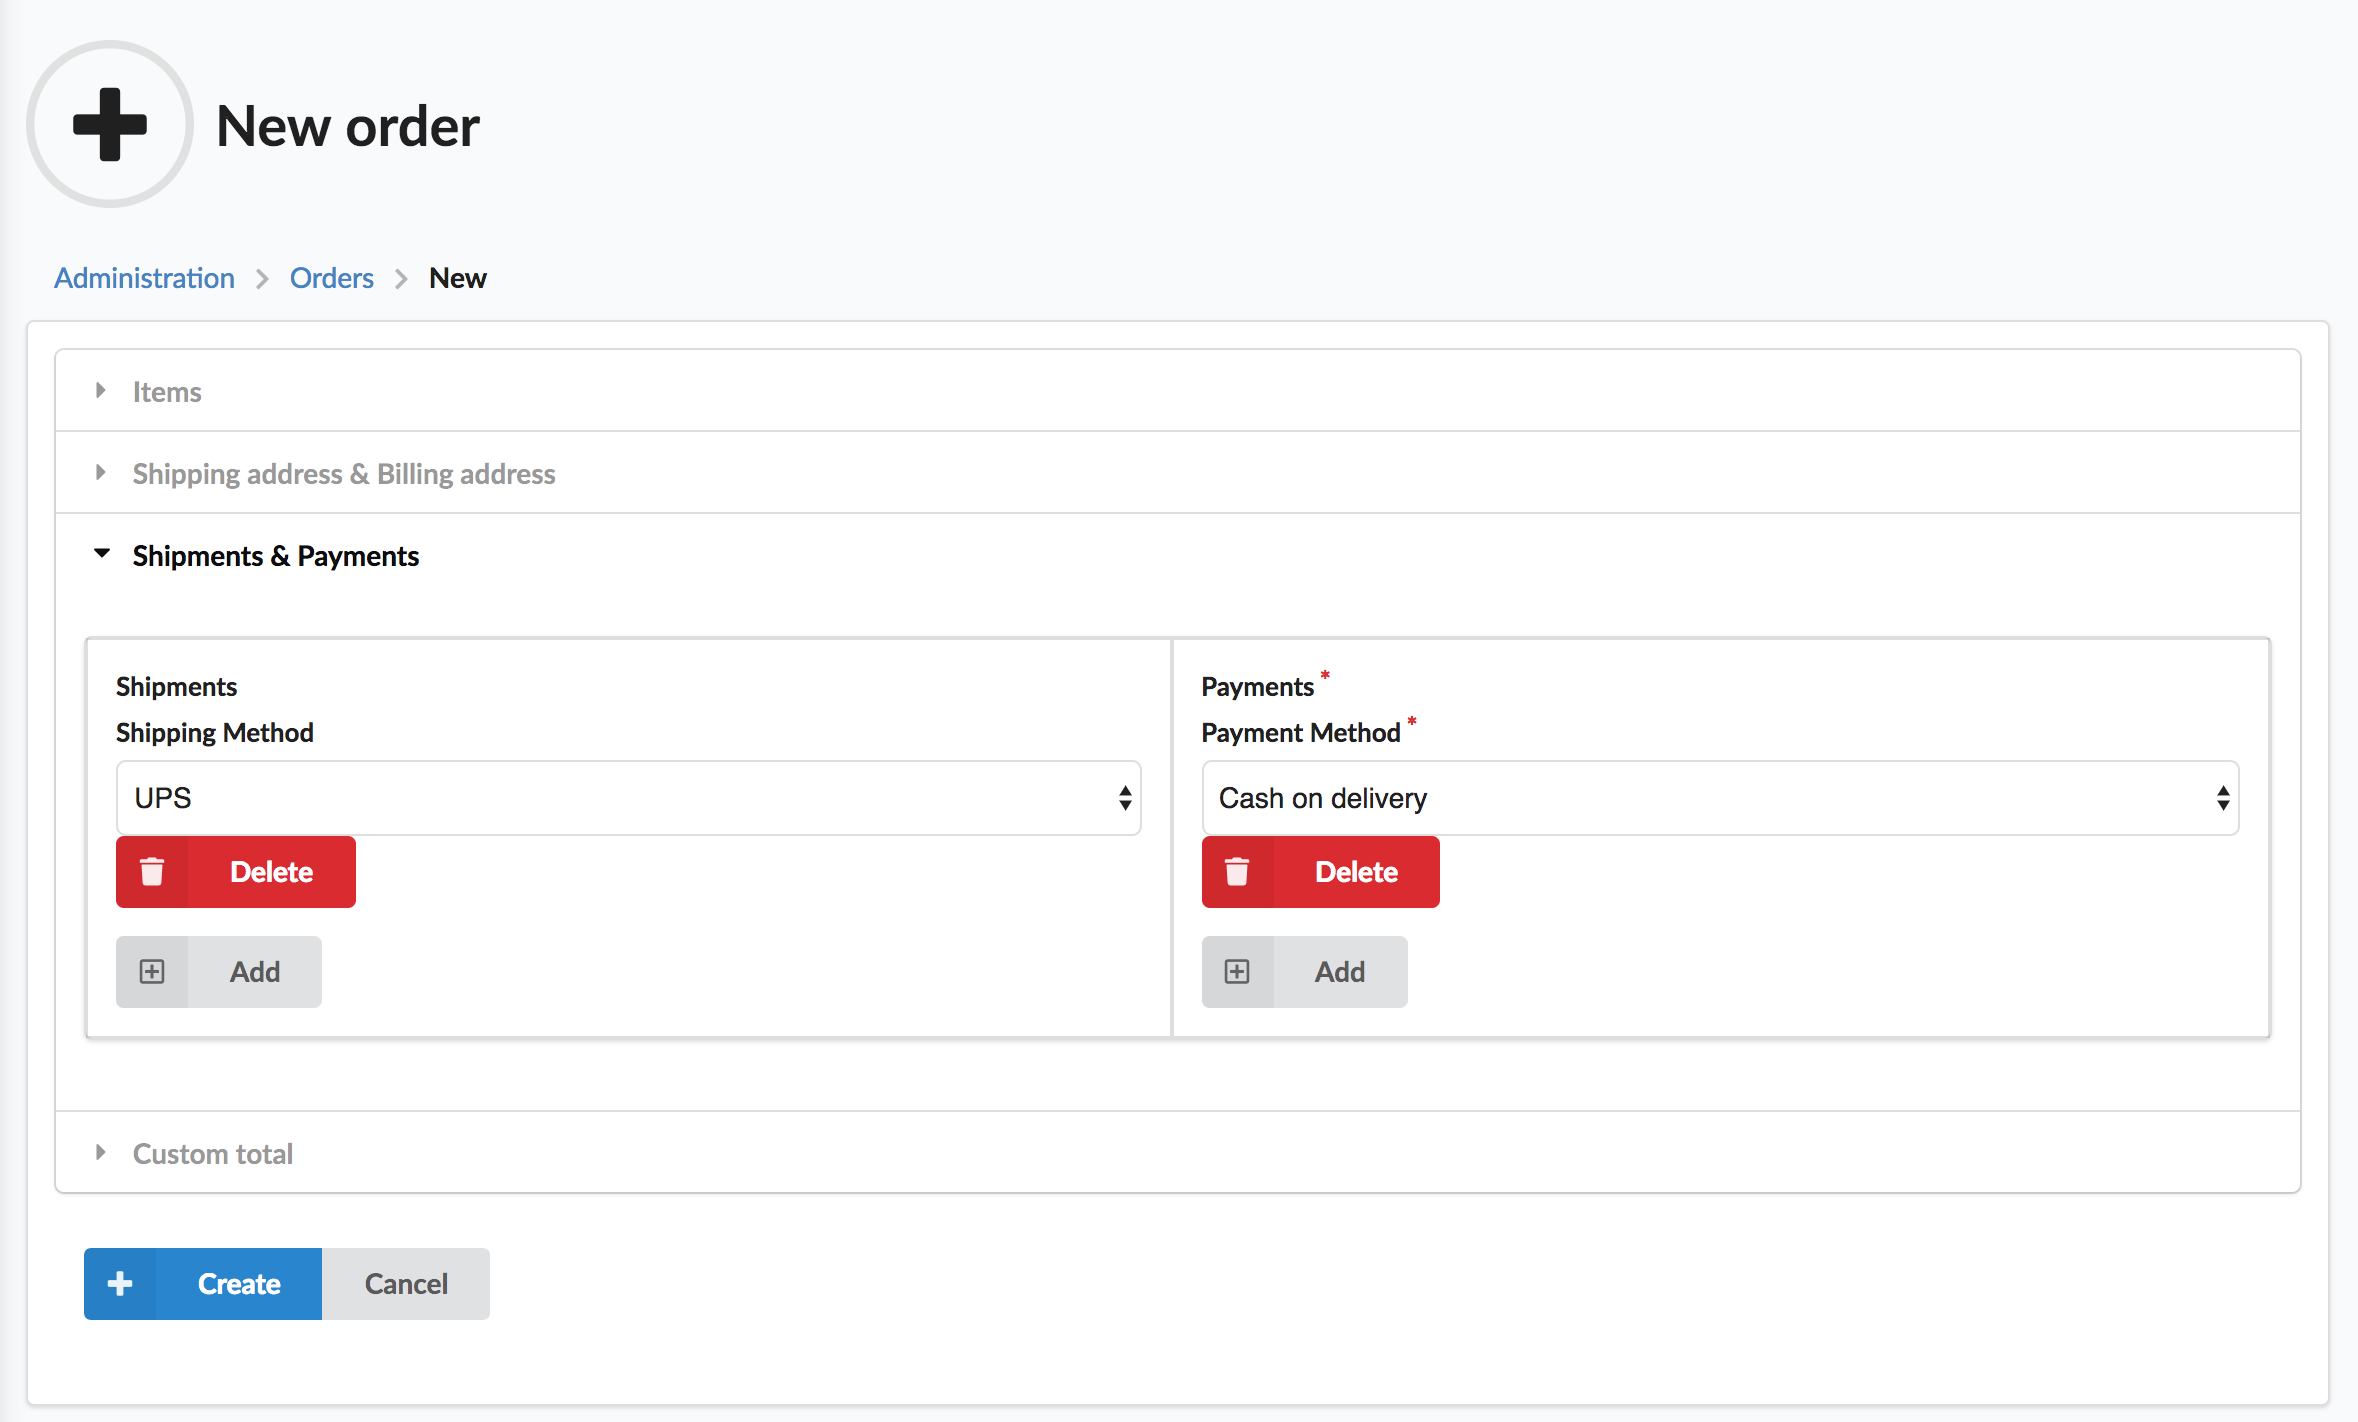 Screenshot showing the order creation page, Shipments&Payments section